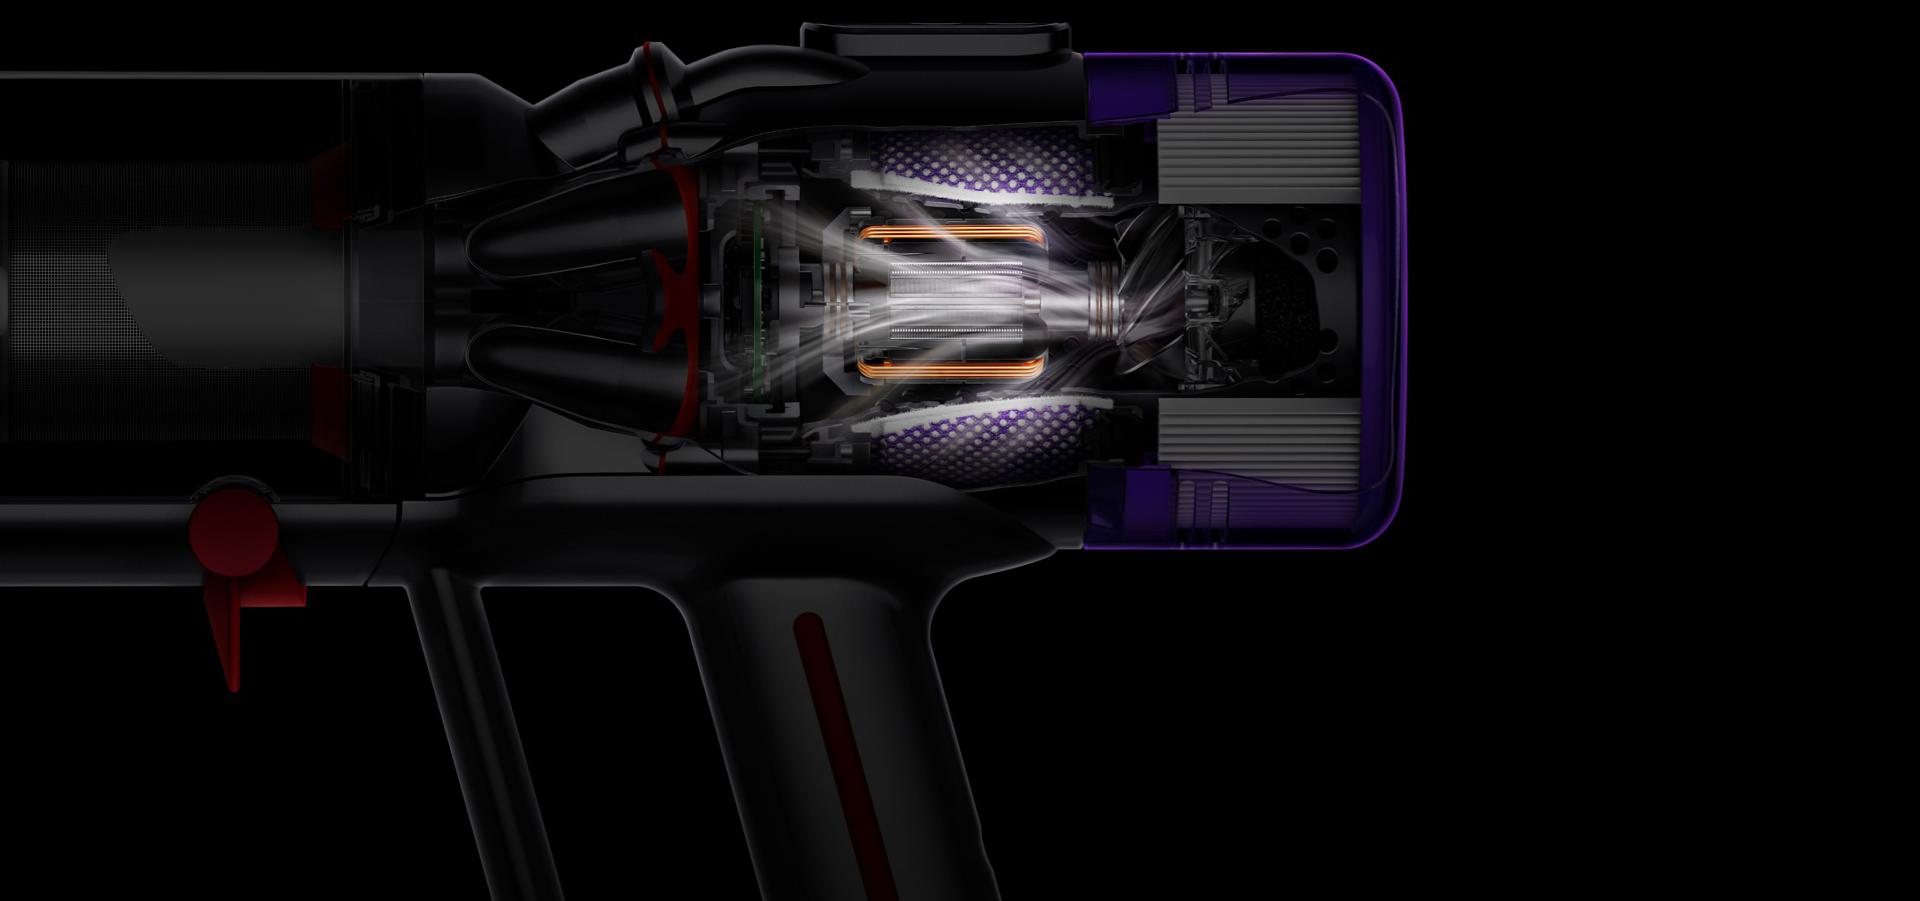 The Dyson Micro 1.5kg's 5 layers of filtration